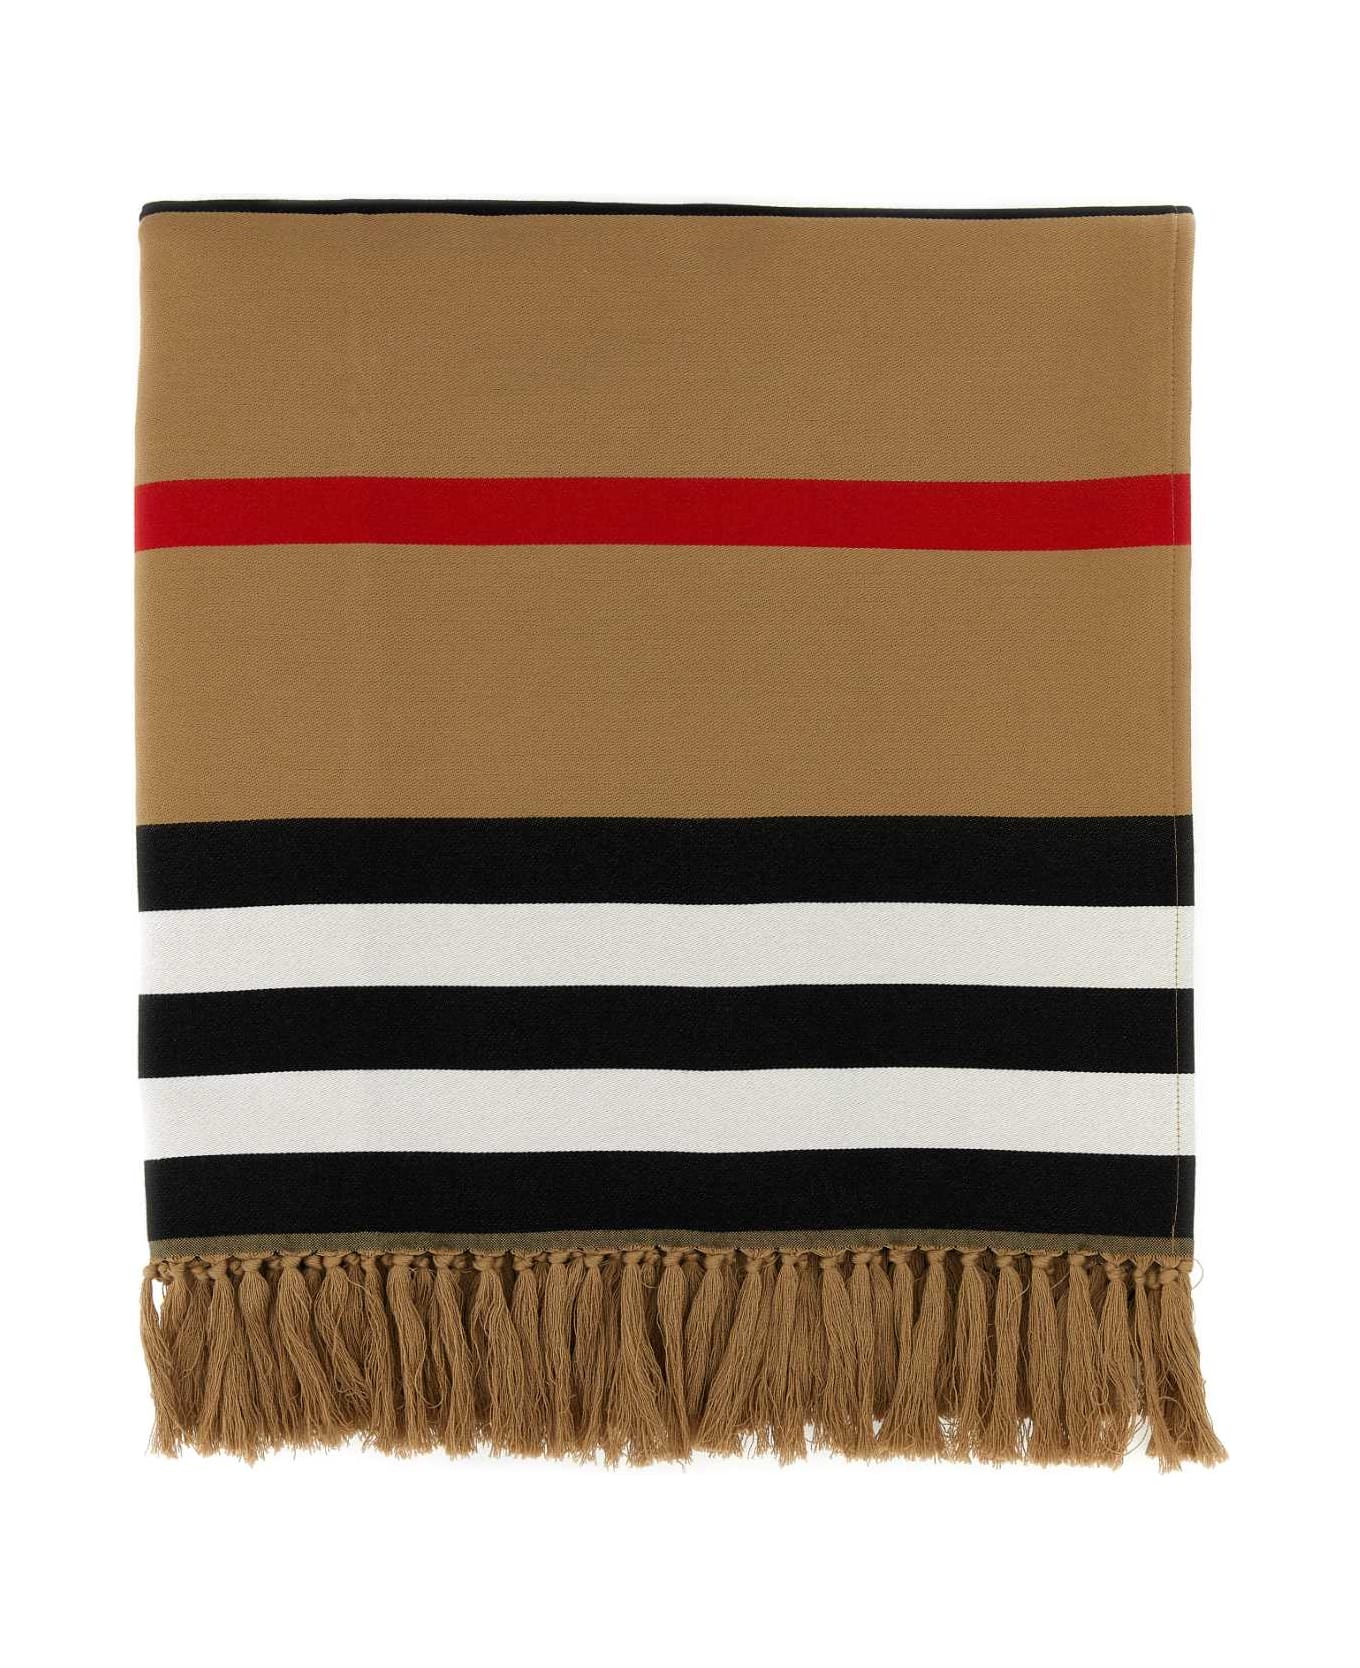 Burberry Embroidered Cotton Blanket - ARCHIVEBEIGE